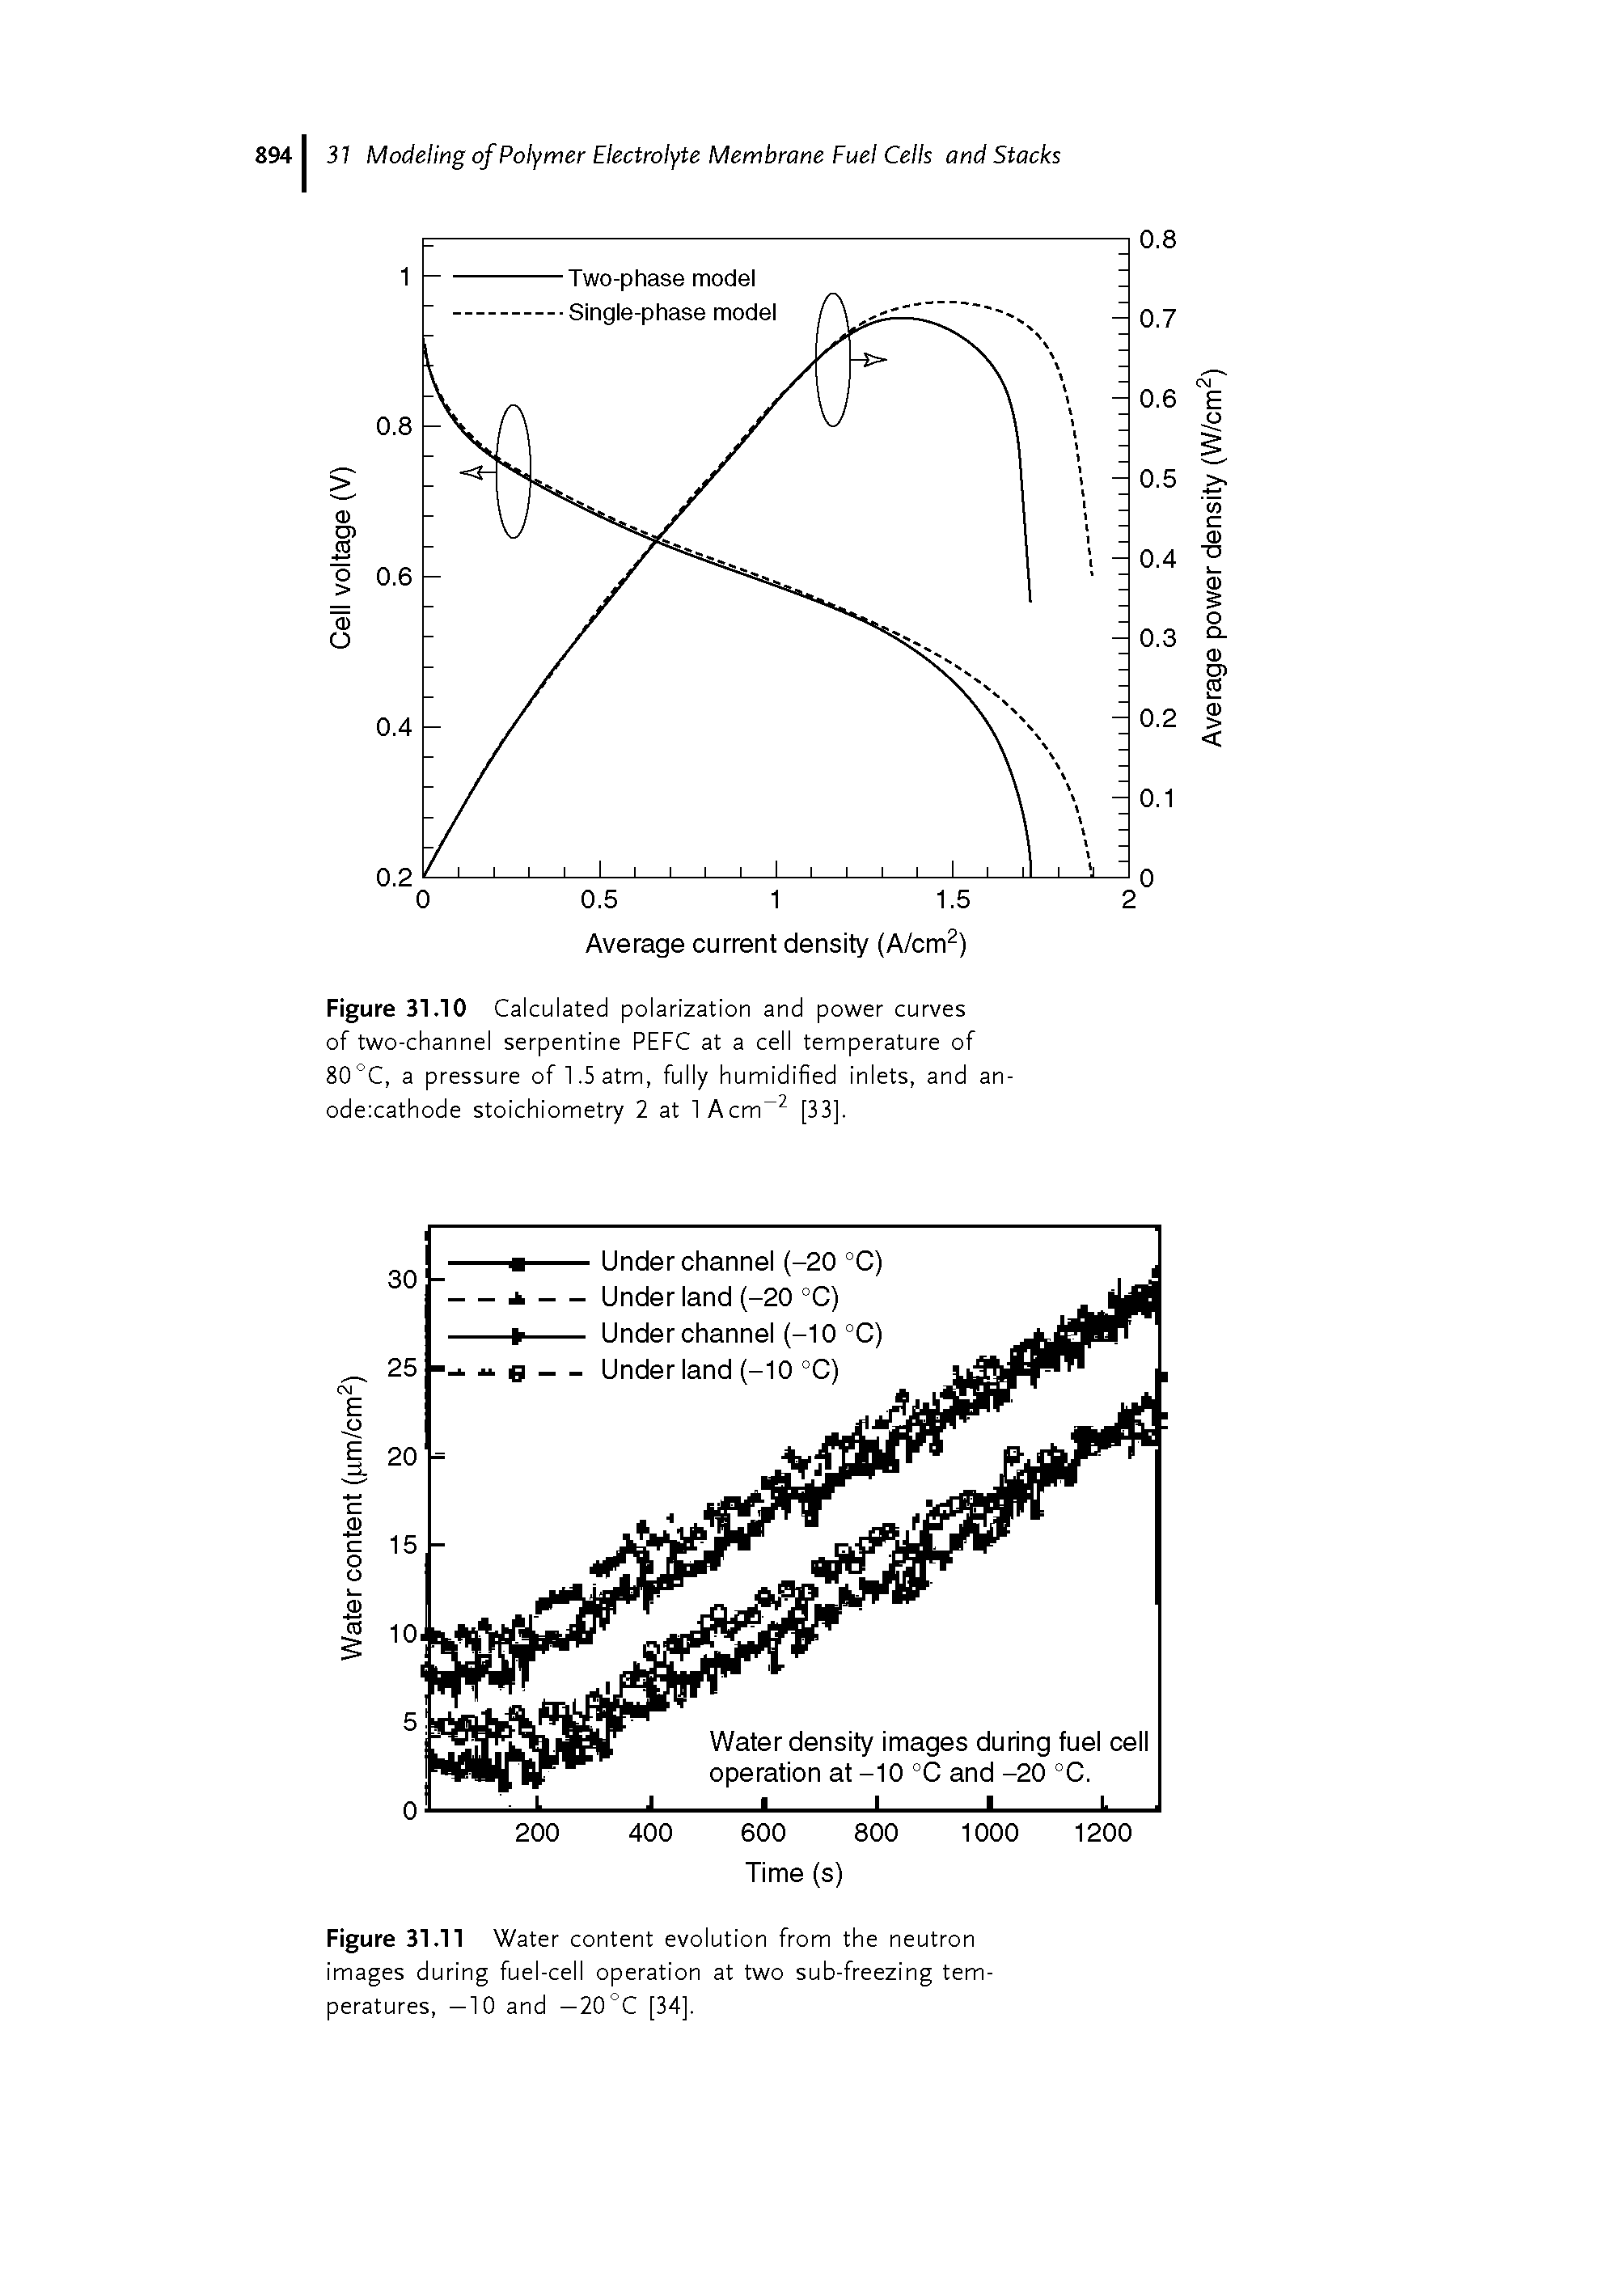 Figure 31.10 Calculated polarization and power curves of two-channel serpentine PEFC at a cell temperature of 80°C, a pressure of 1.5 atm, fully humidified inlets, and an-ode cathode stoichiometry 2 at lAcm [33].